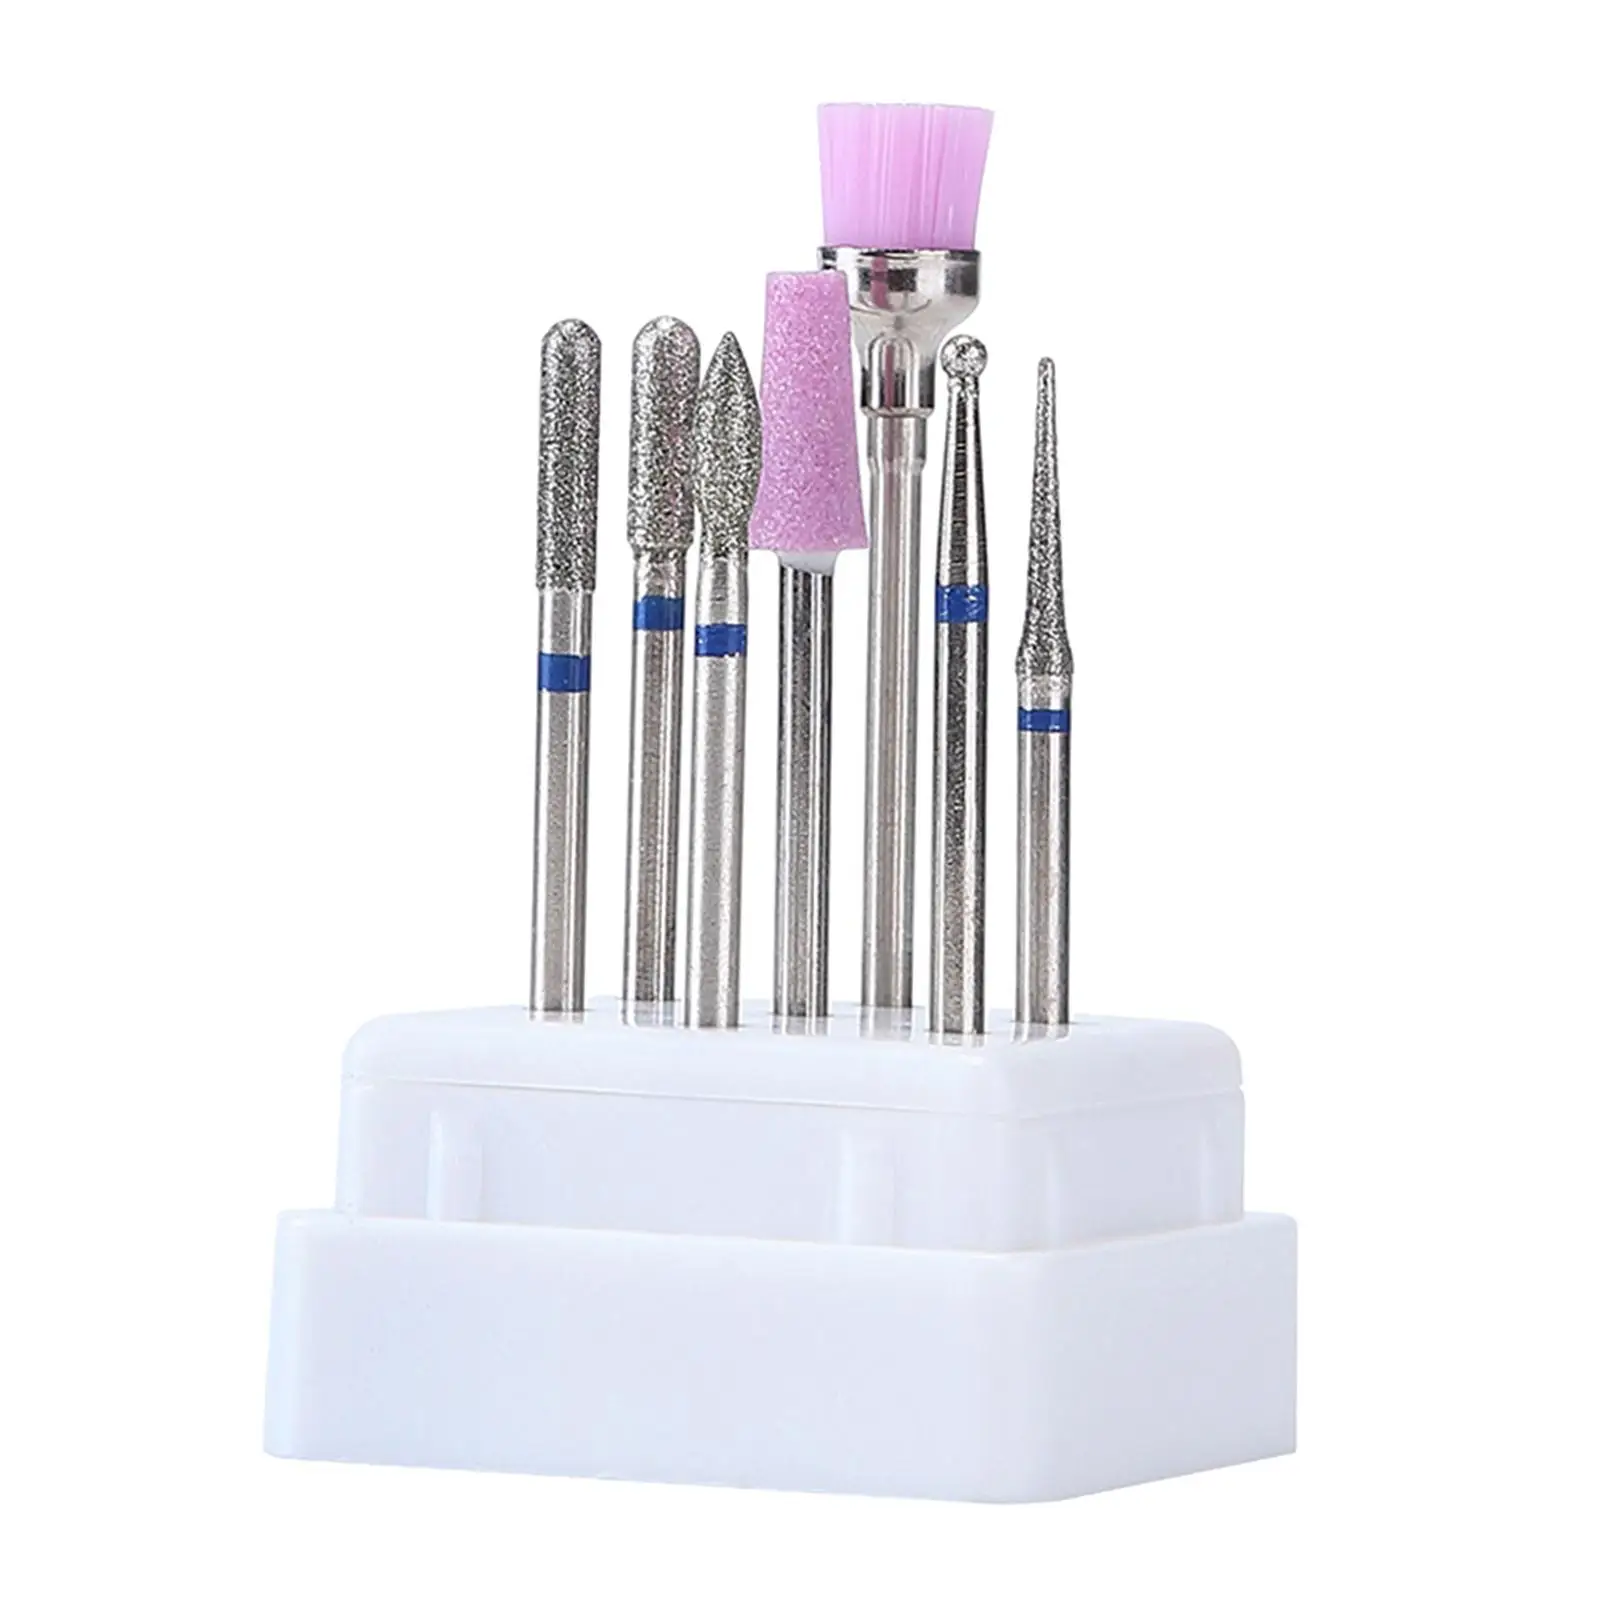 Electric Nail Drill Bits Kit with Holder Box Polishing File Grinding Heads for Pedicure Manicure Remove Dead Skin Nail Schools